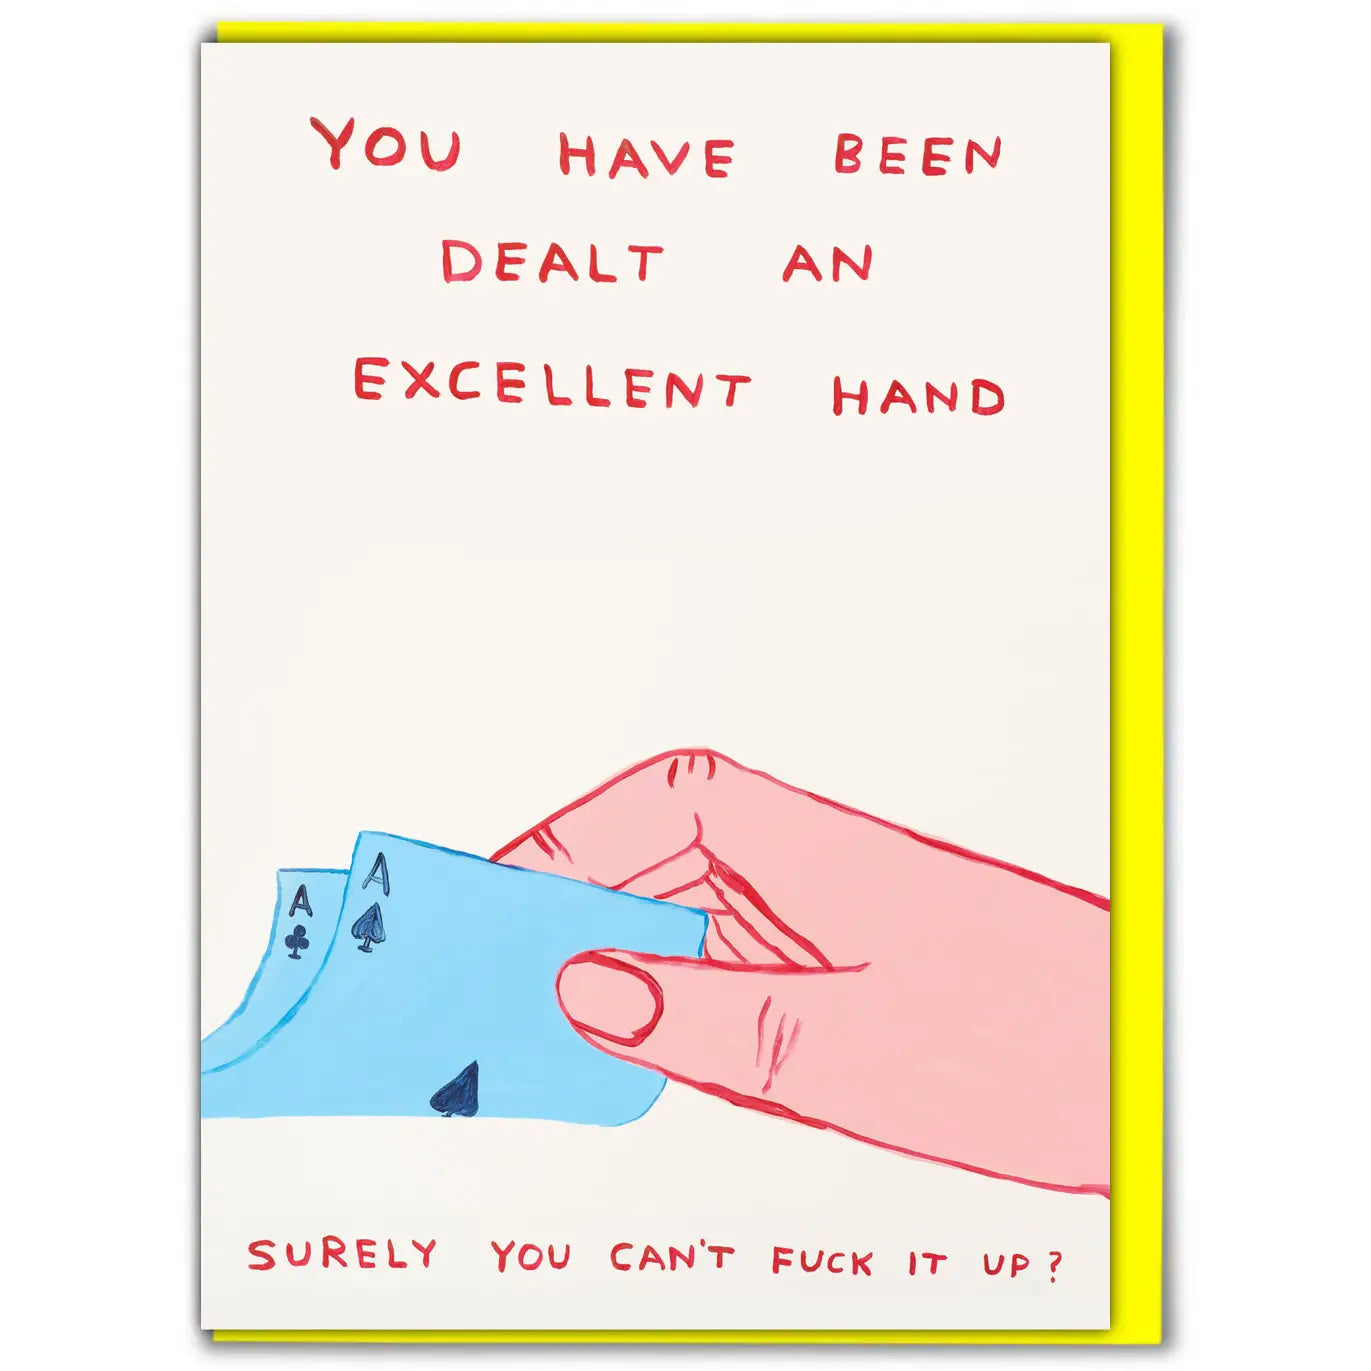 David Shrigley “Surely You Can’t Fuck it up” Card